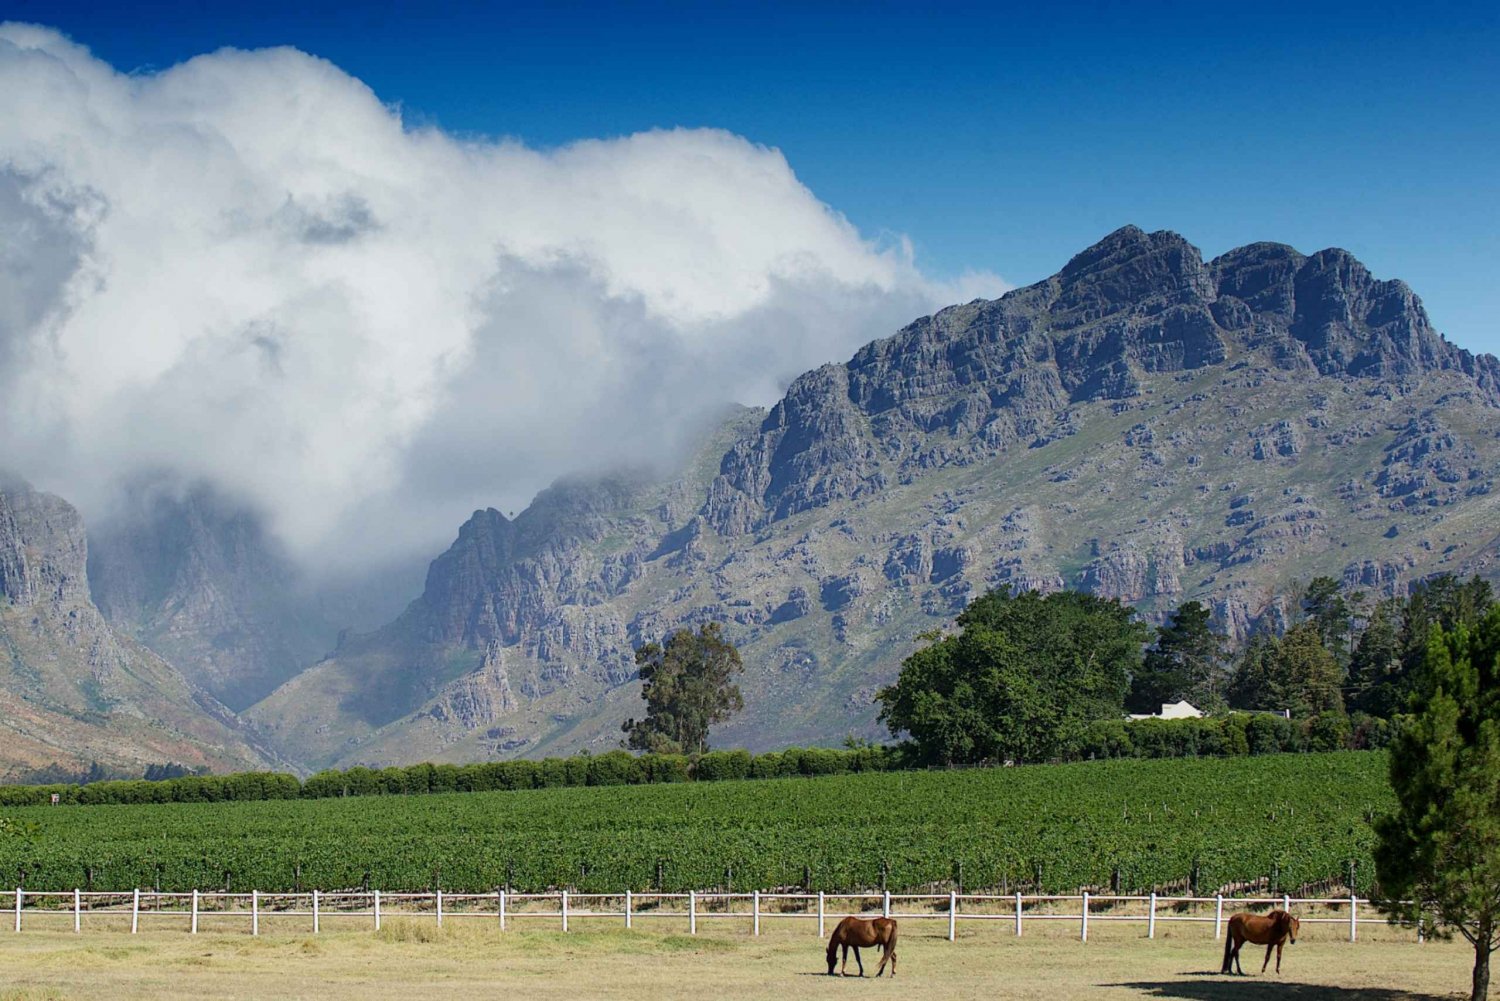 From Cape Town: Private Guided Winelands Tour with Pickup